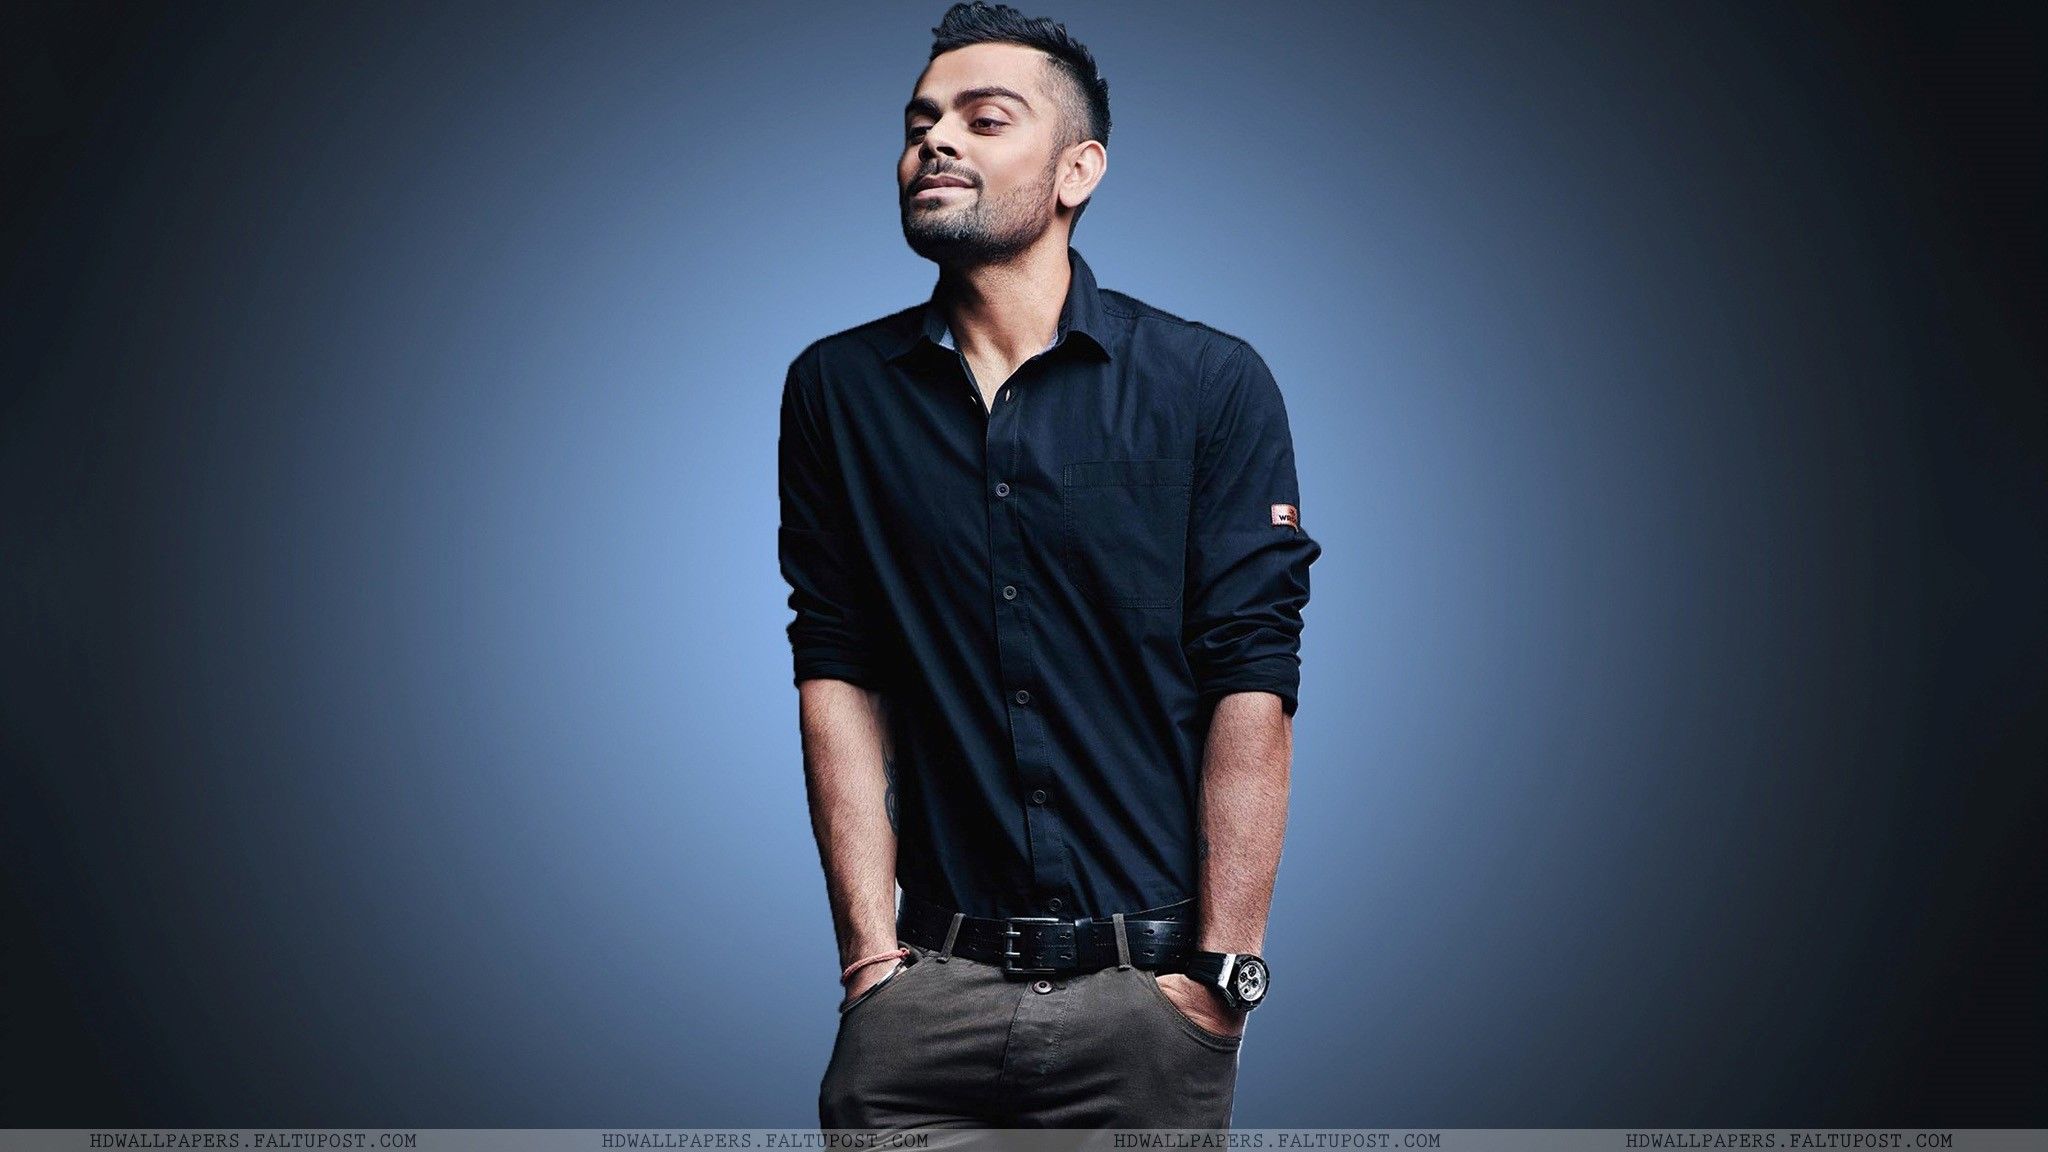 DOWNLOAD VIRAT KOHLI HD WALLPAPERS BACKGROUND FOR ANDROID